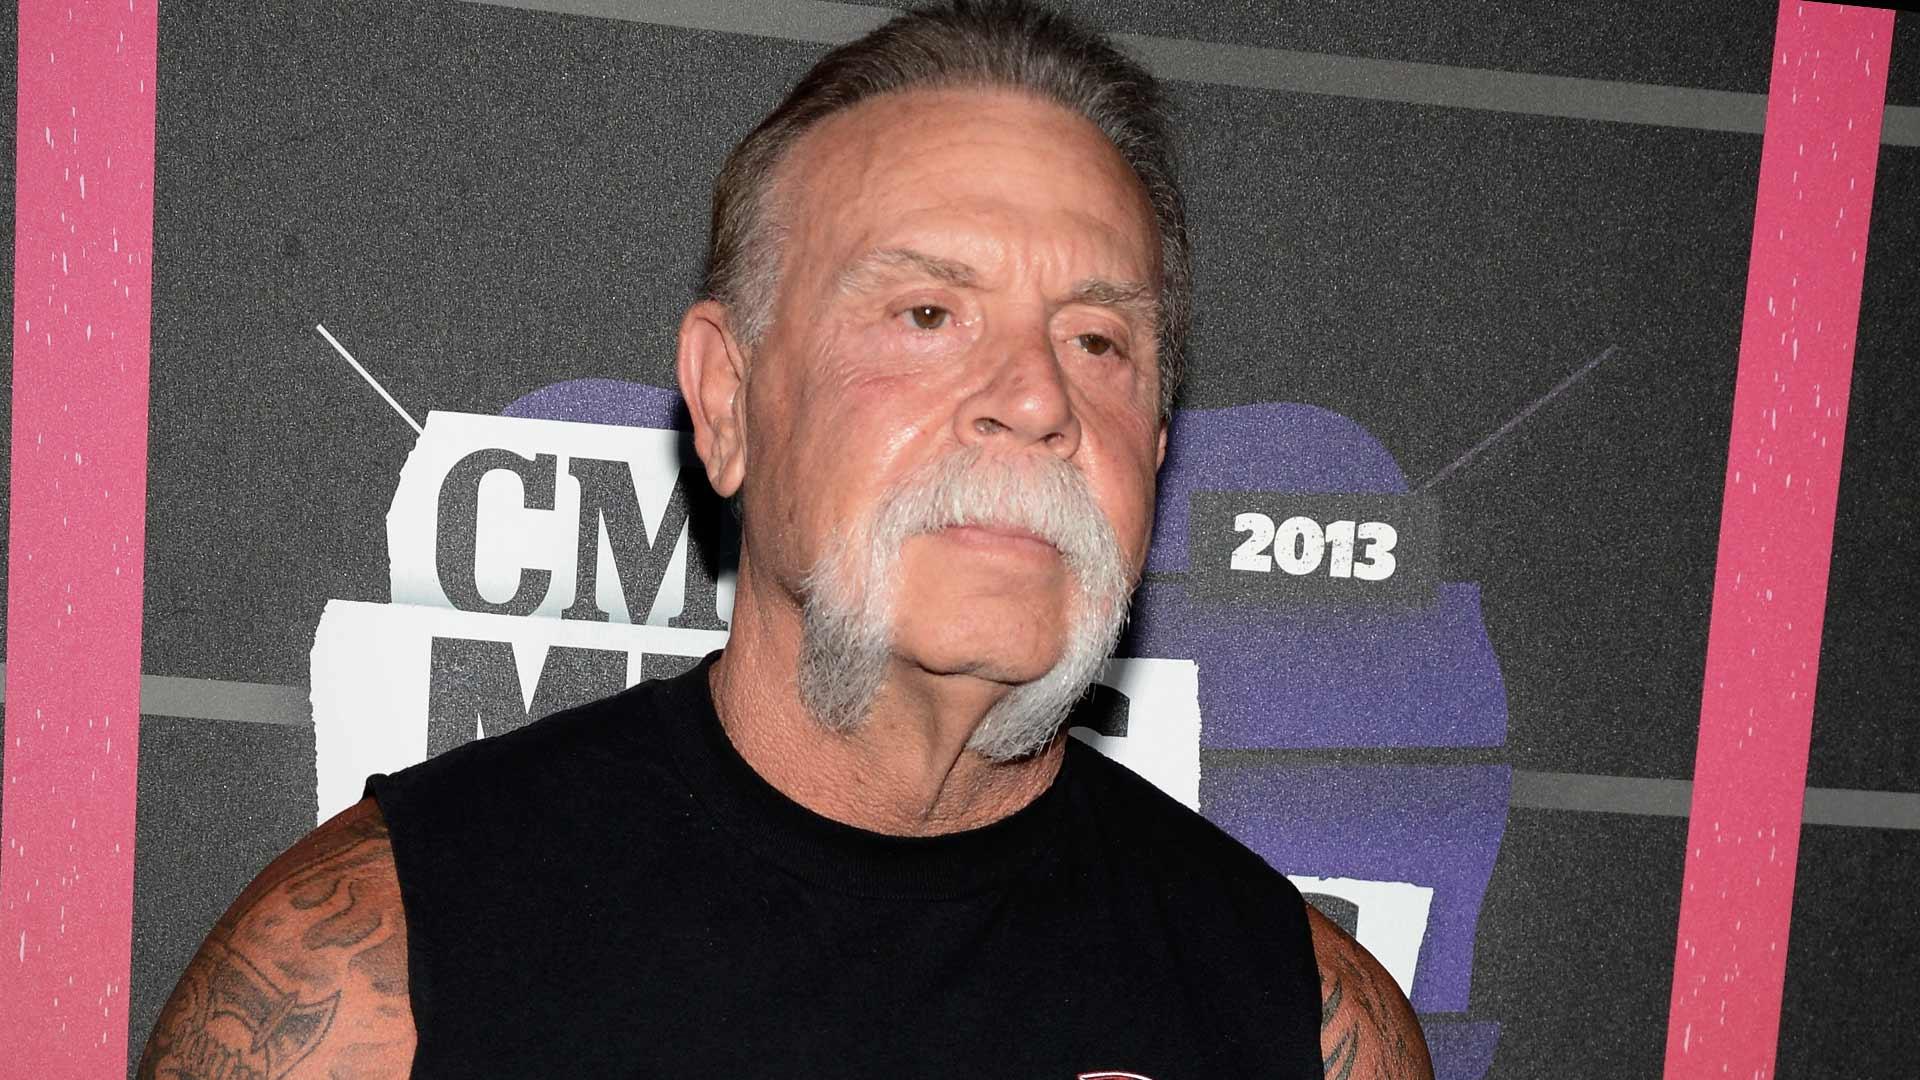 ‘American Chopper’ Star Paul Teutul Sr. Found in Contempt of Court, Ordered to Pay $17,000